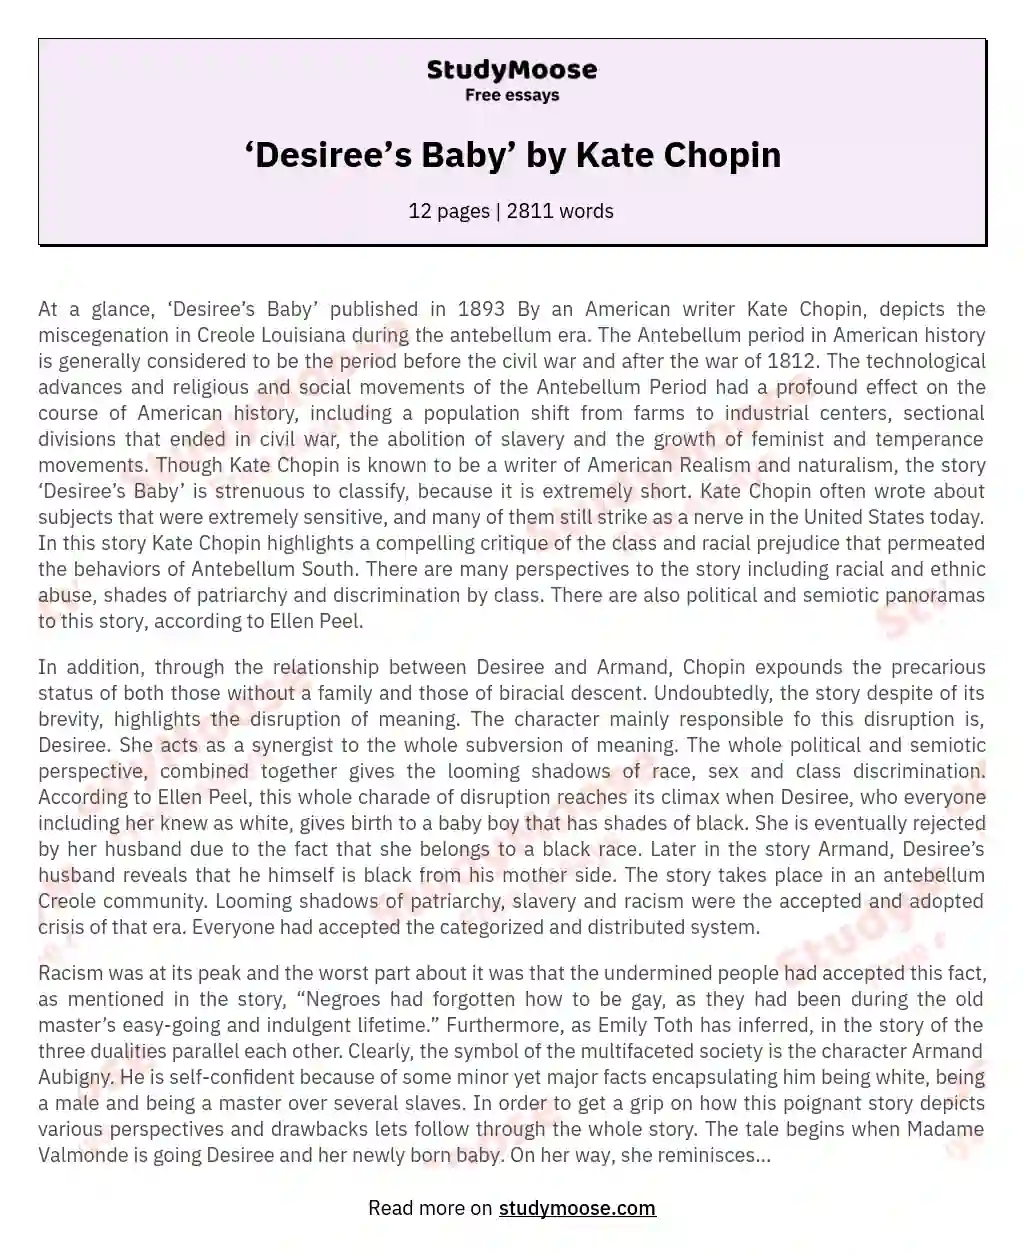 ‘Desiree’s Baby’ by Kate Chopin